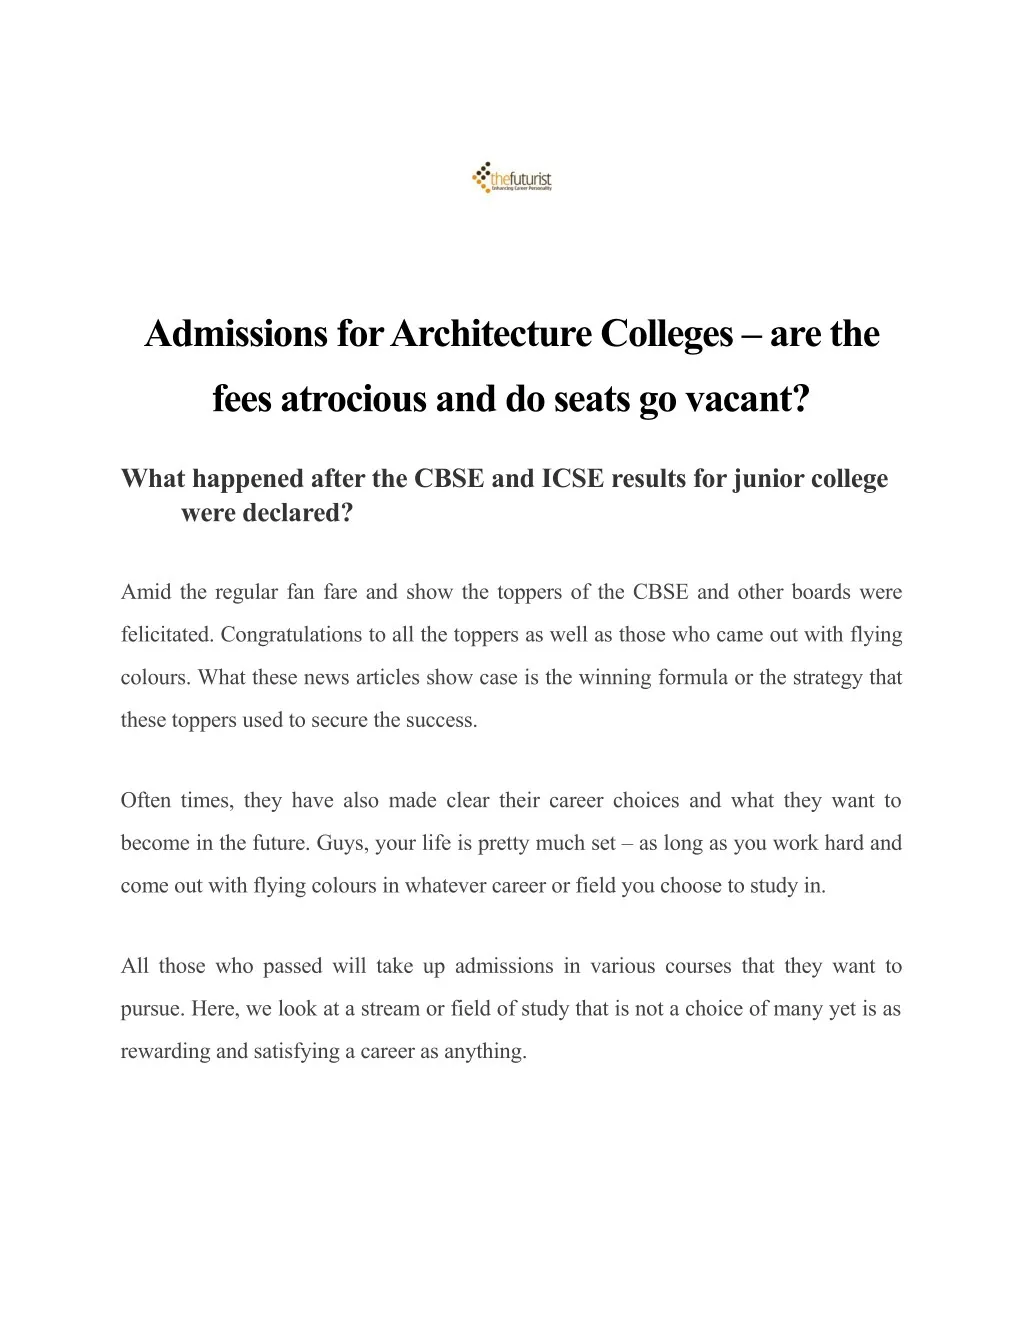 admissions for architecture colleges are the